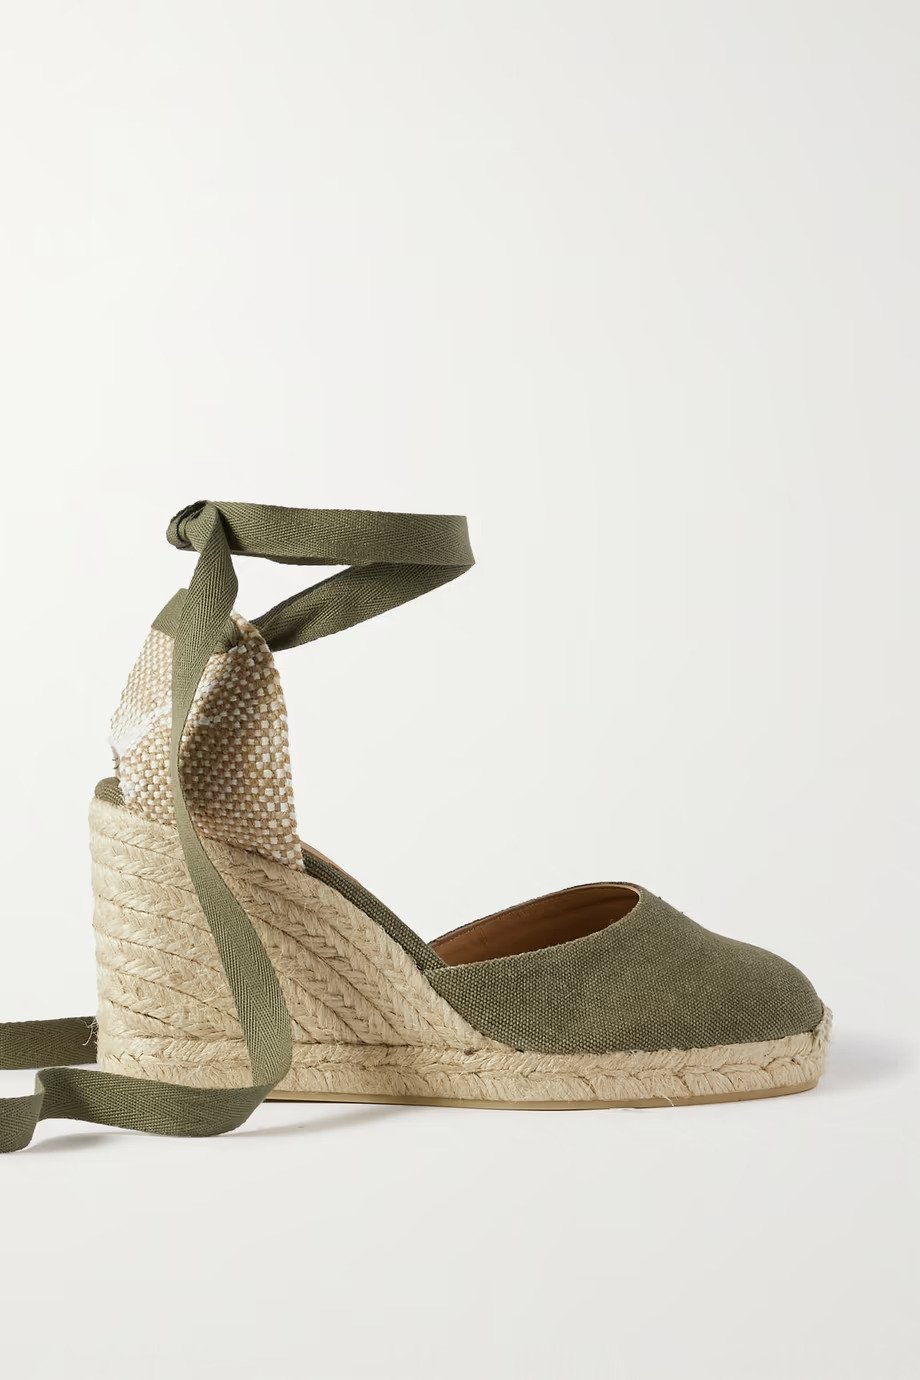 Castañer Espadrilles: The Shoe Every Fashion Editor Wants | Who What ...